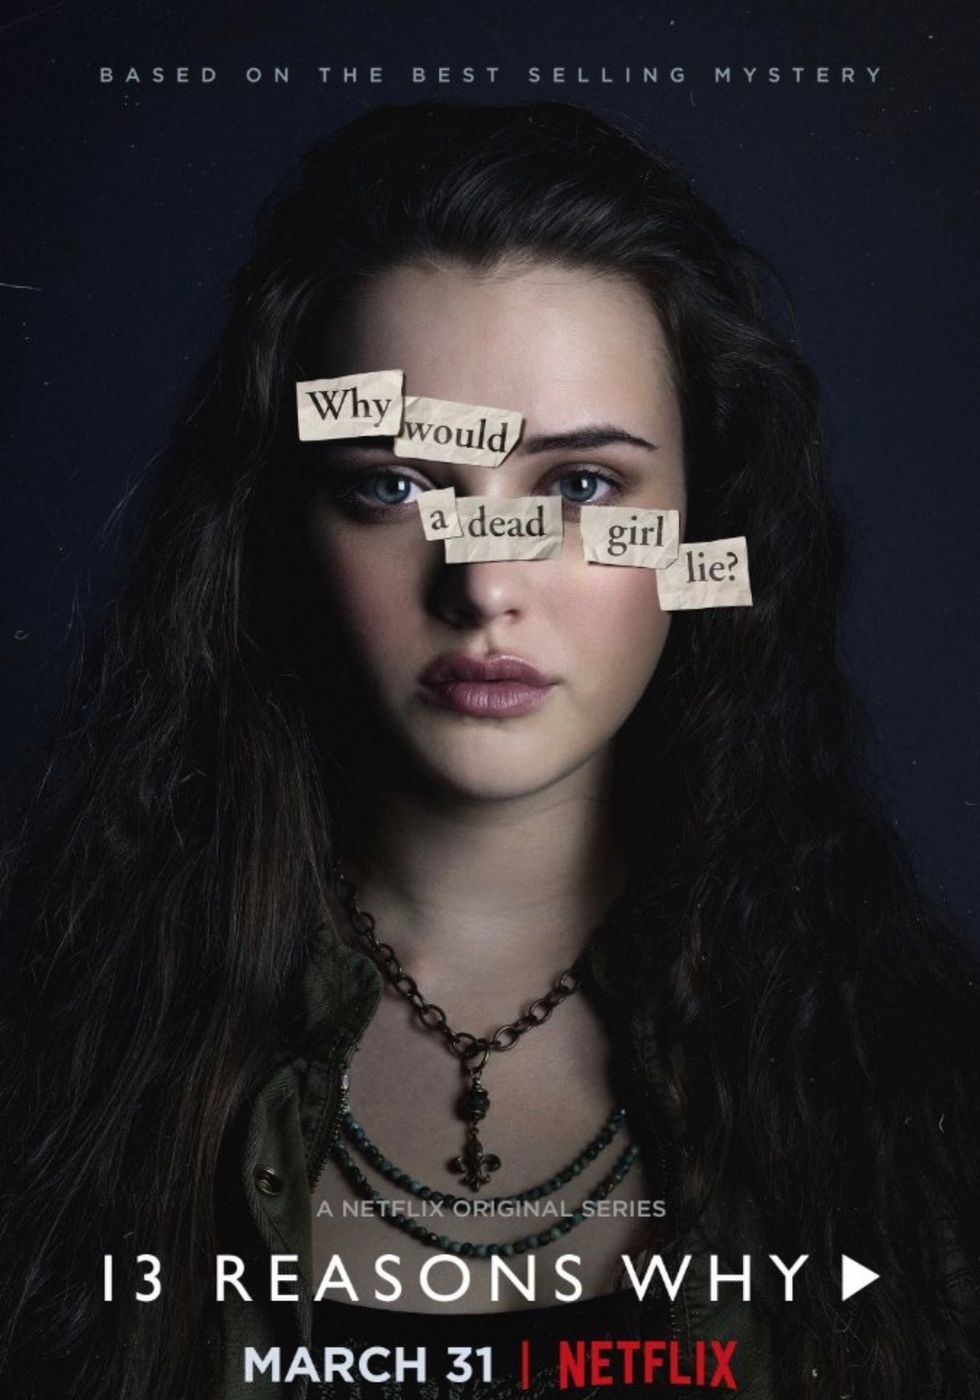 13 Reasons Why: Controversial or Helpful?